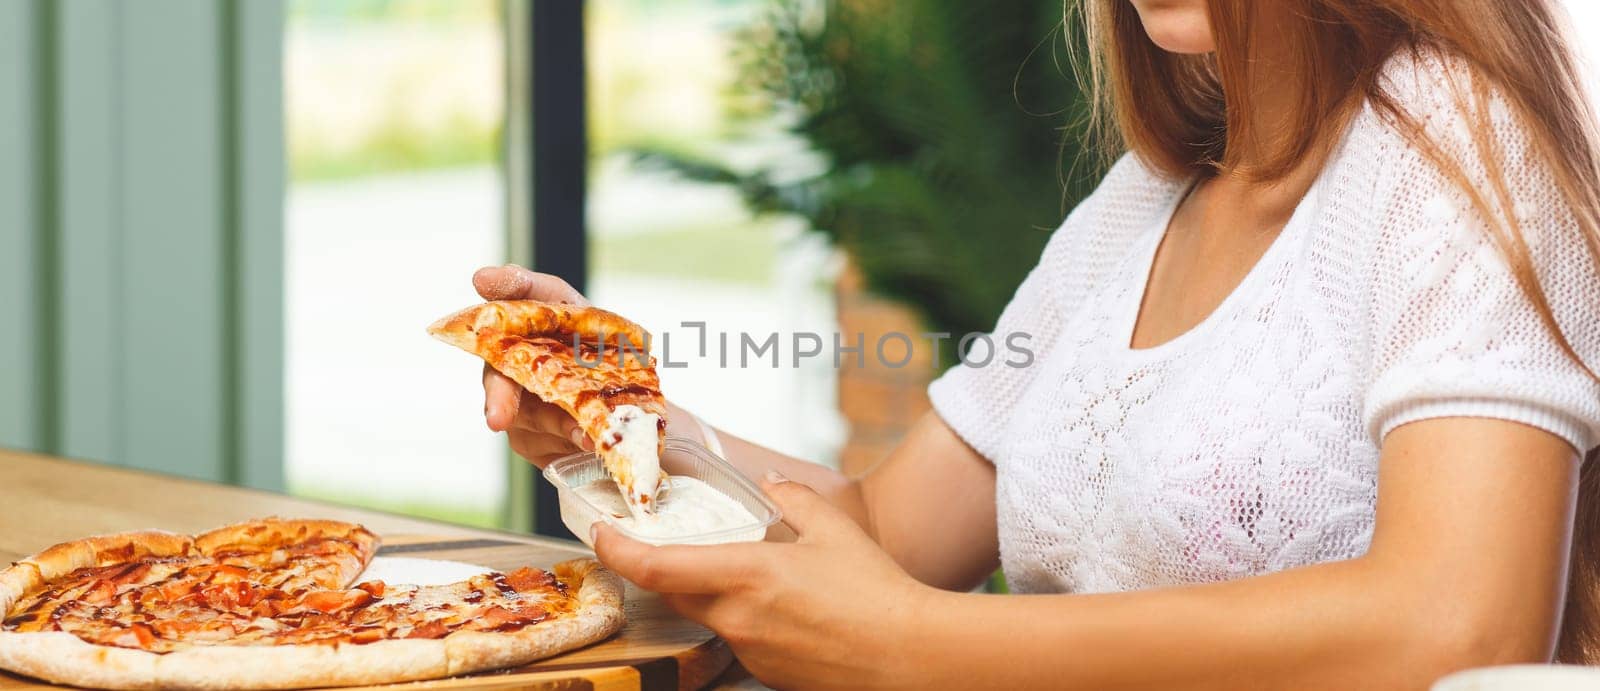 A girl dips a slice of pizza in sauce in a plastic container before eating it